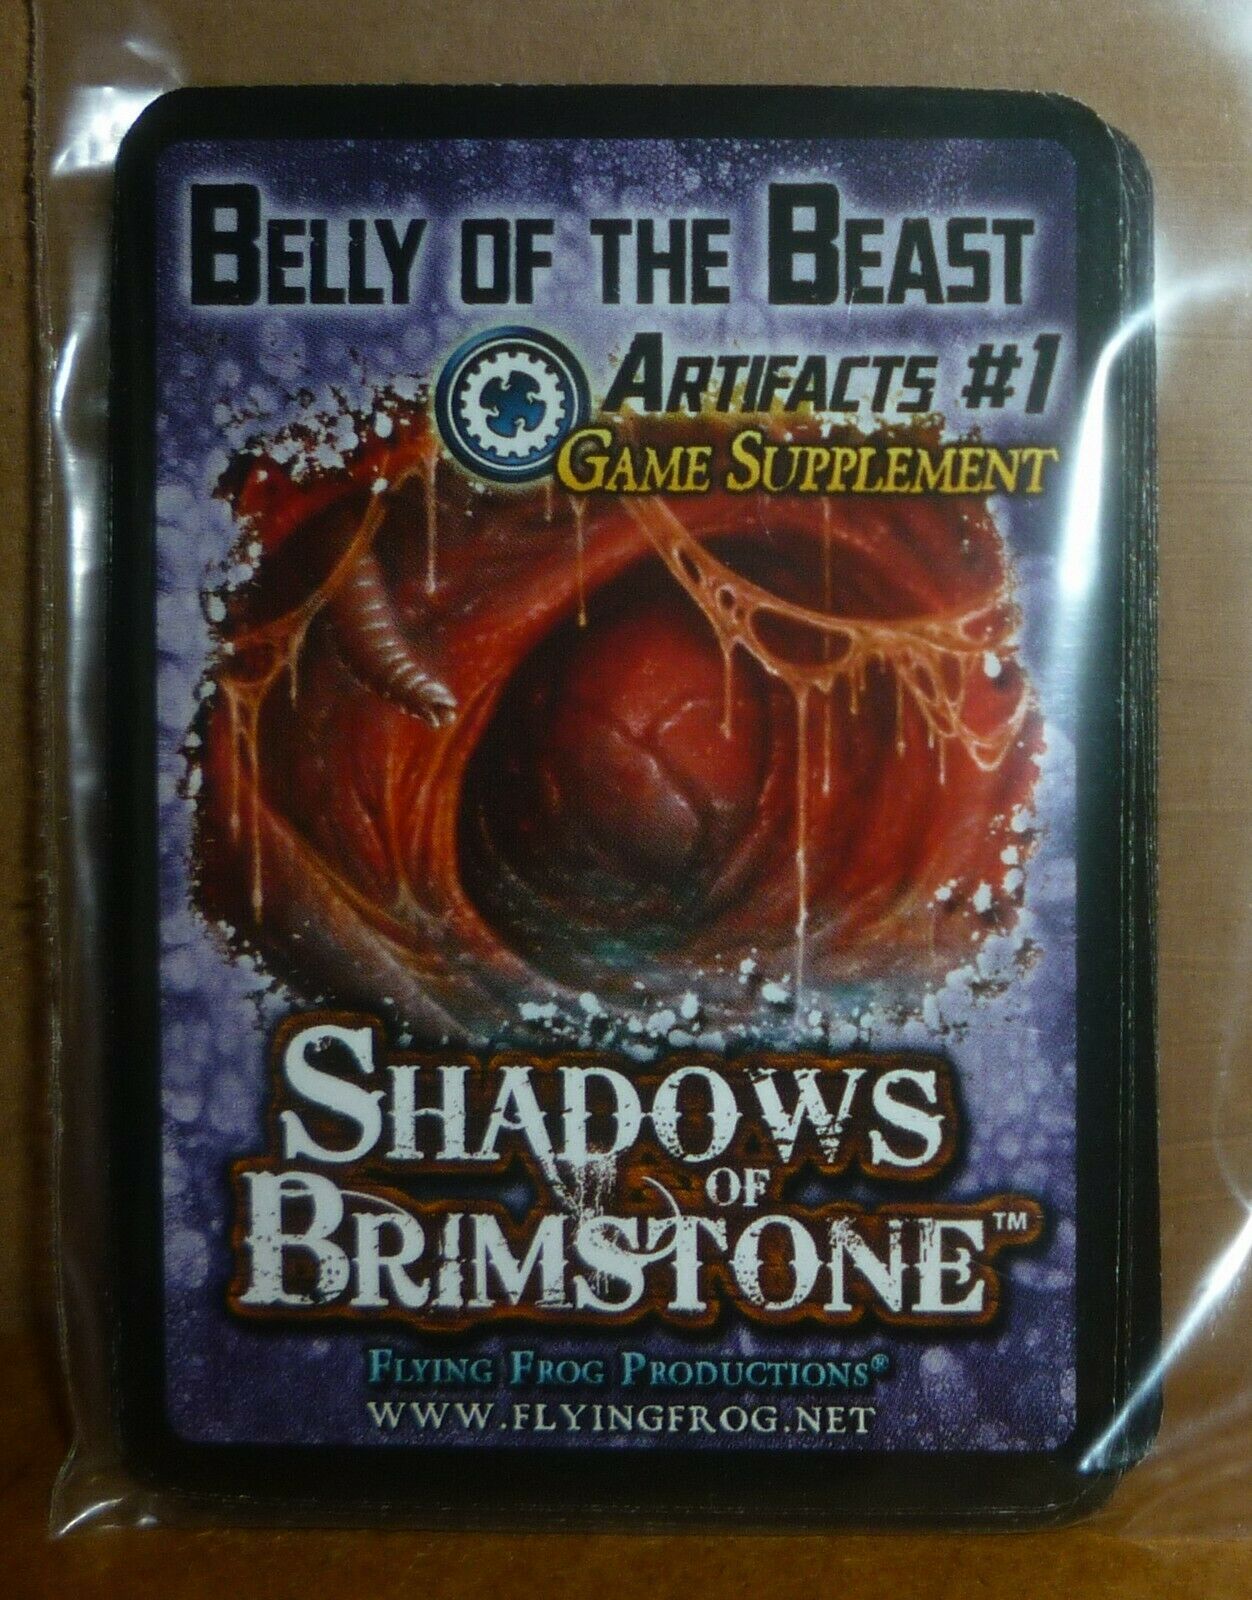 Shadows of Brimstone: Belly of the Beast Artifacts Pack #1 Game Supplement